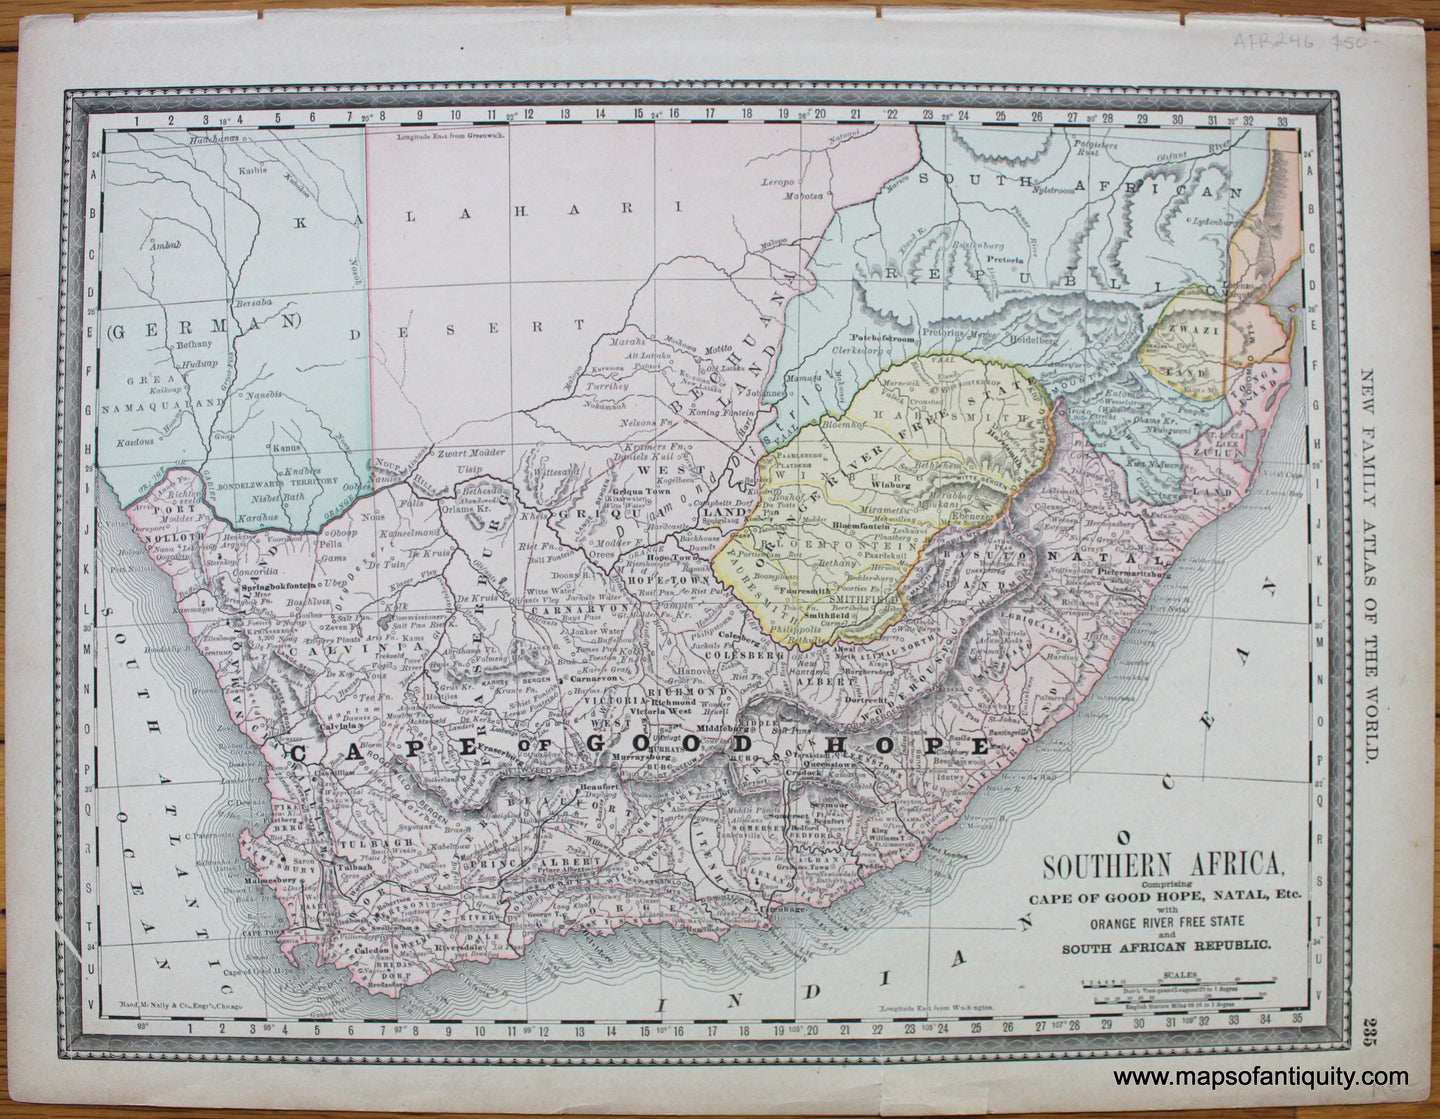 Antique-Printed-Color-Map-Southern-Africa-Comprising-Cape-of-Good-Hope-Natal-Etc.-with-Orange-River-Free-State-and-South-African-Republic-c.-1891-Rand-McNally-South-Africa-1800s-19th-century-Maps-of-Antiquity